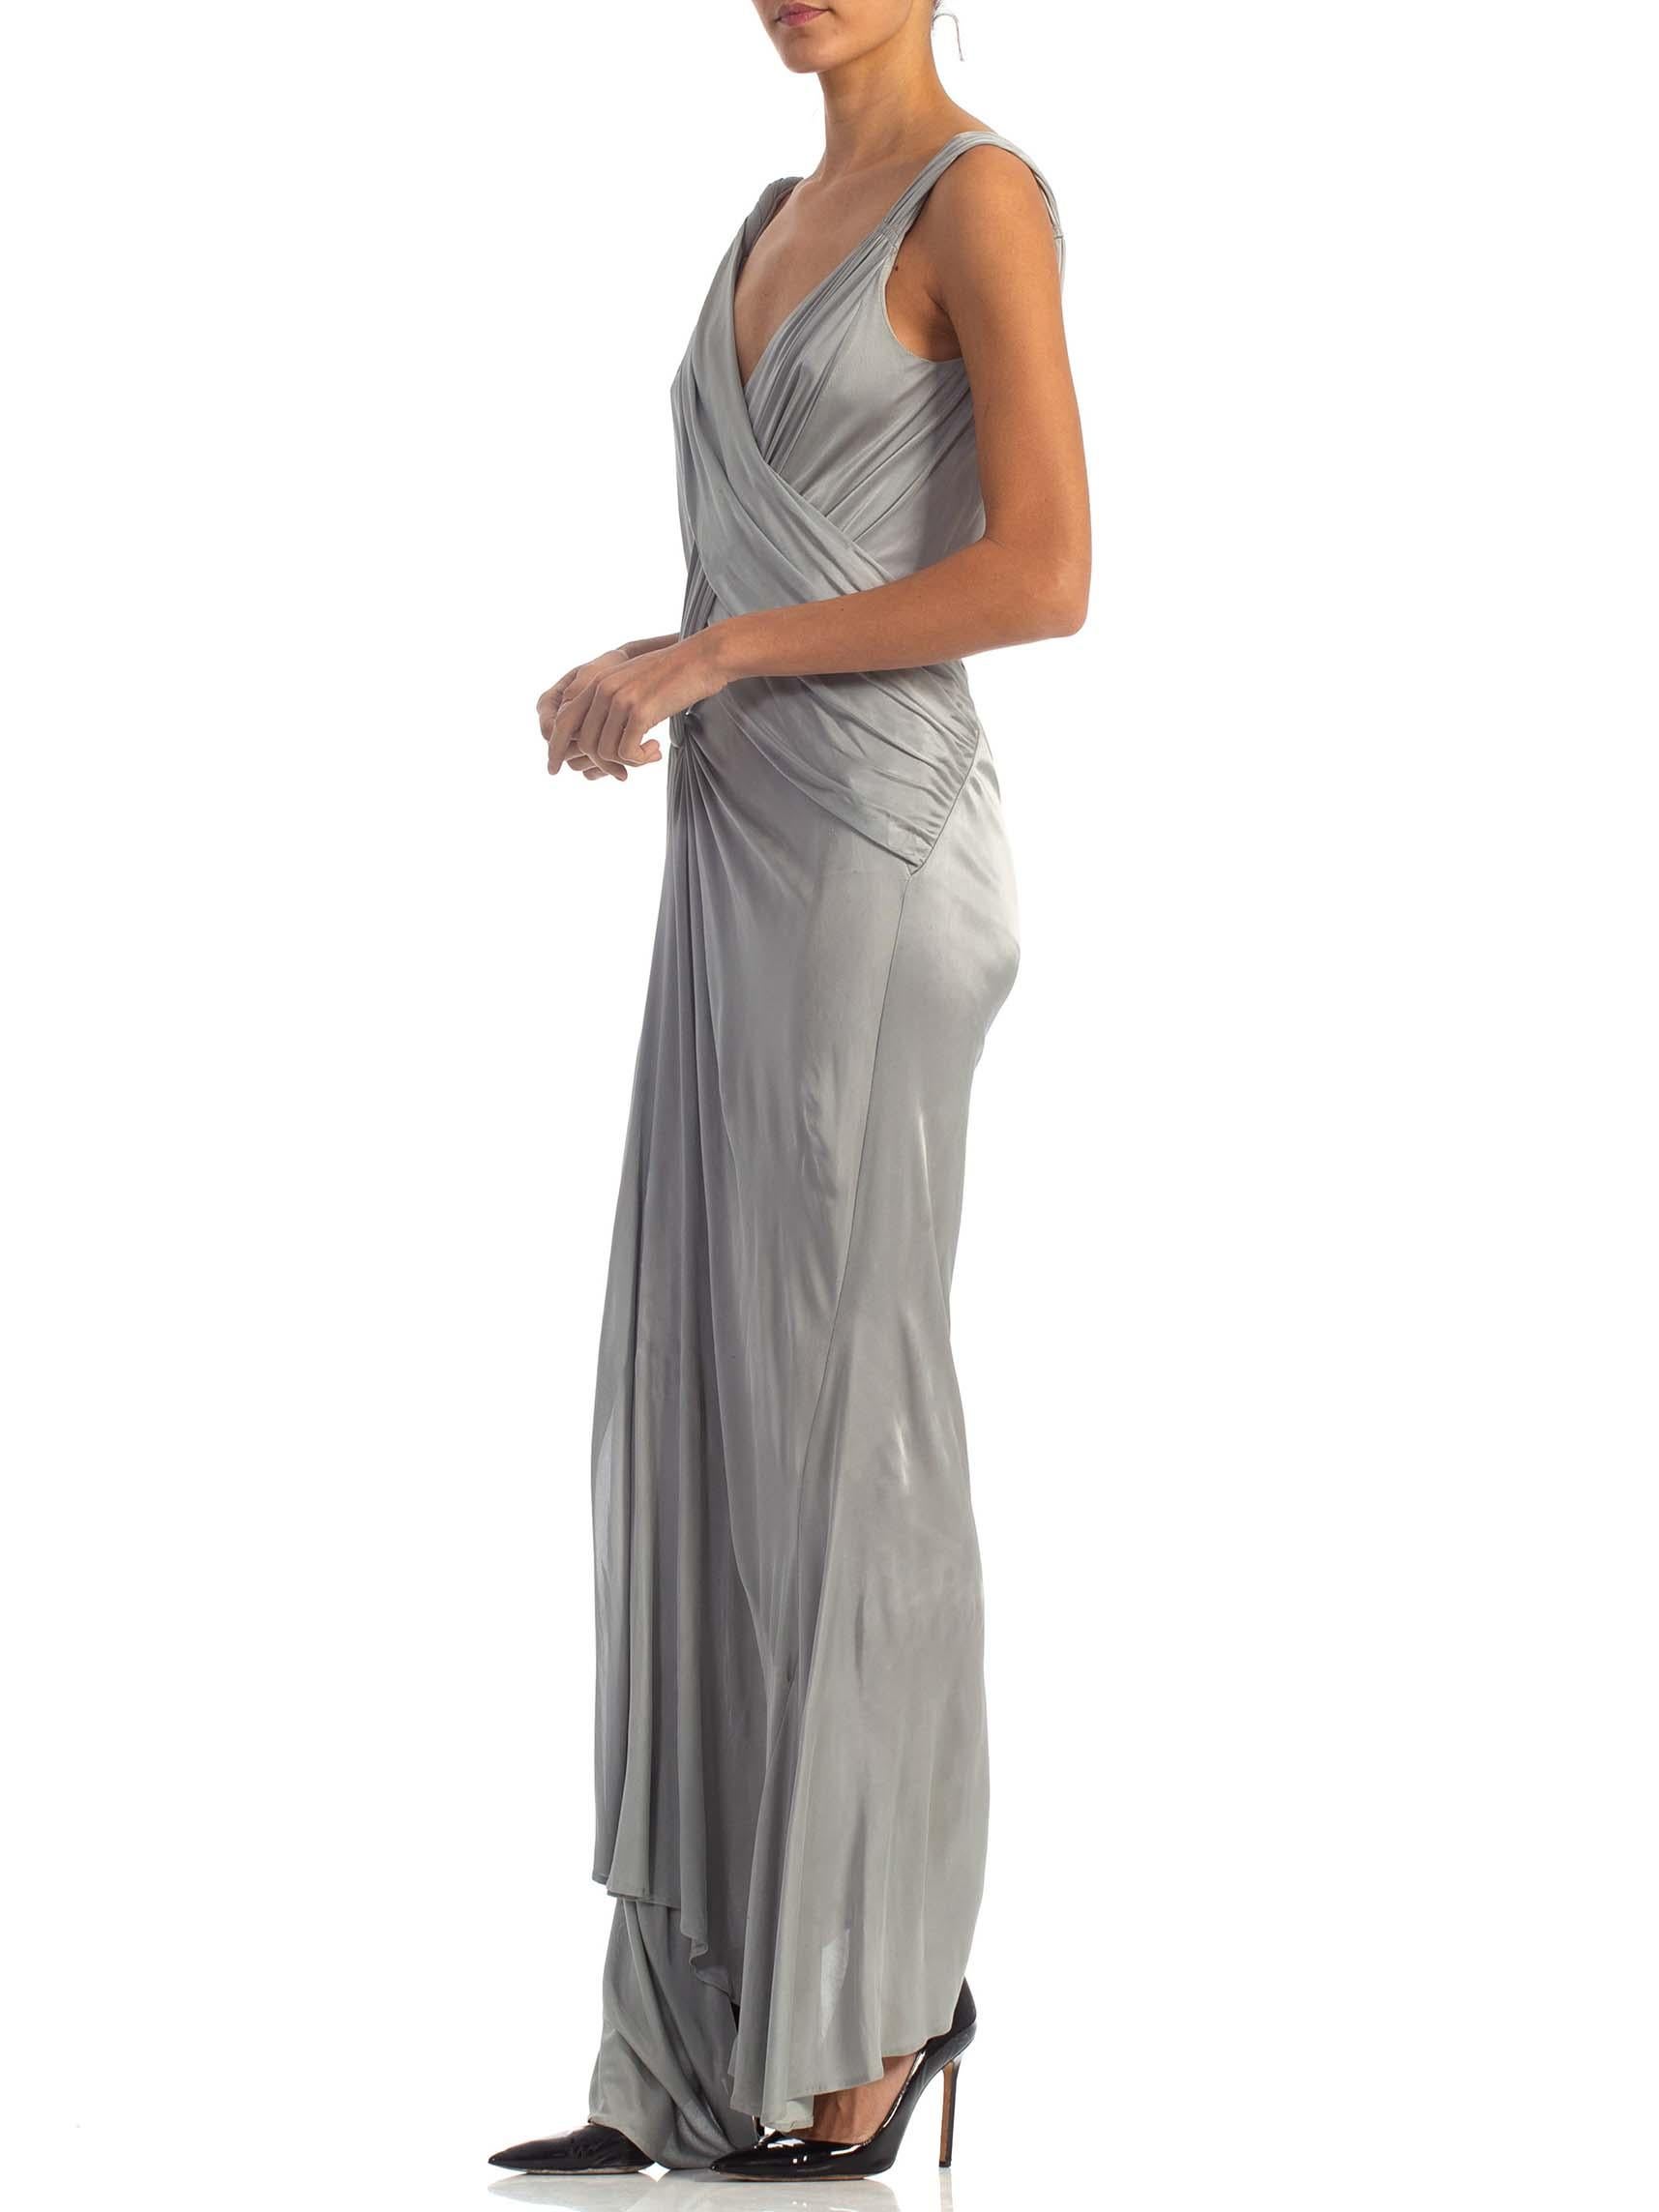 2000S JOHN GALLIANO Dove Grey Rayon Jersey Backless Gown With Slit For Sale 1